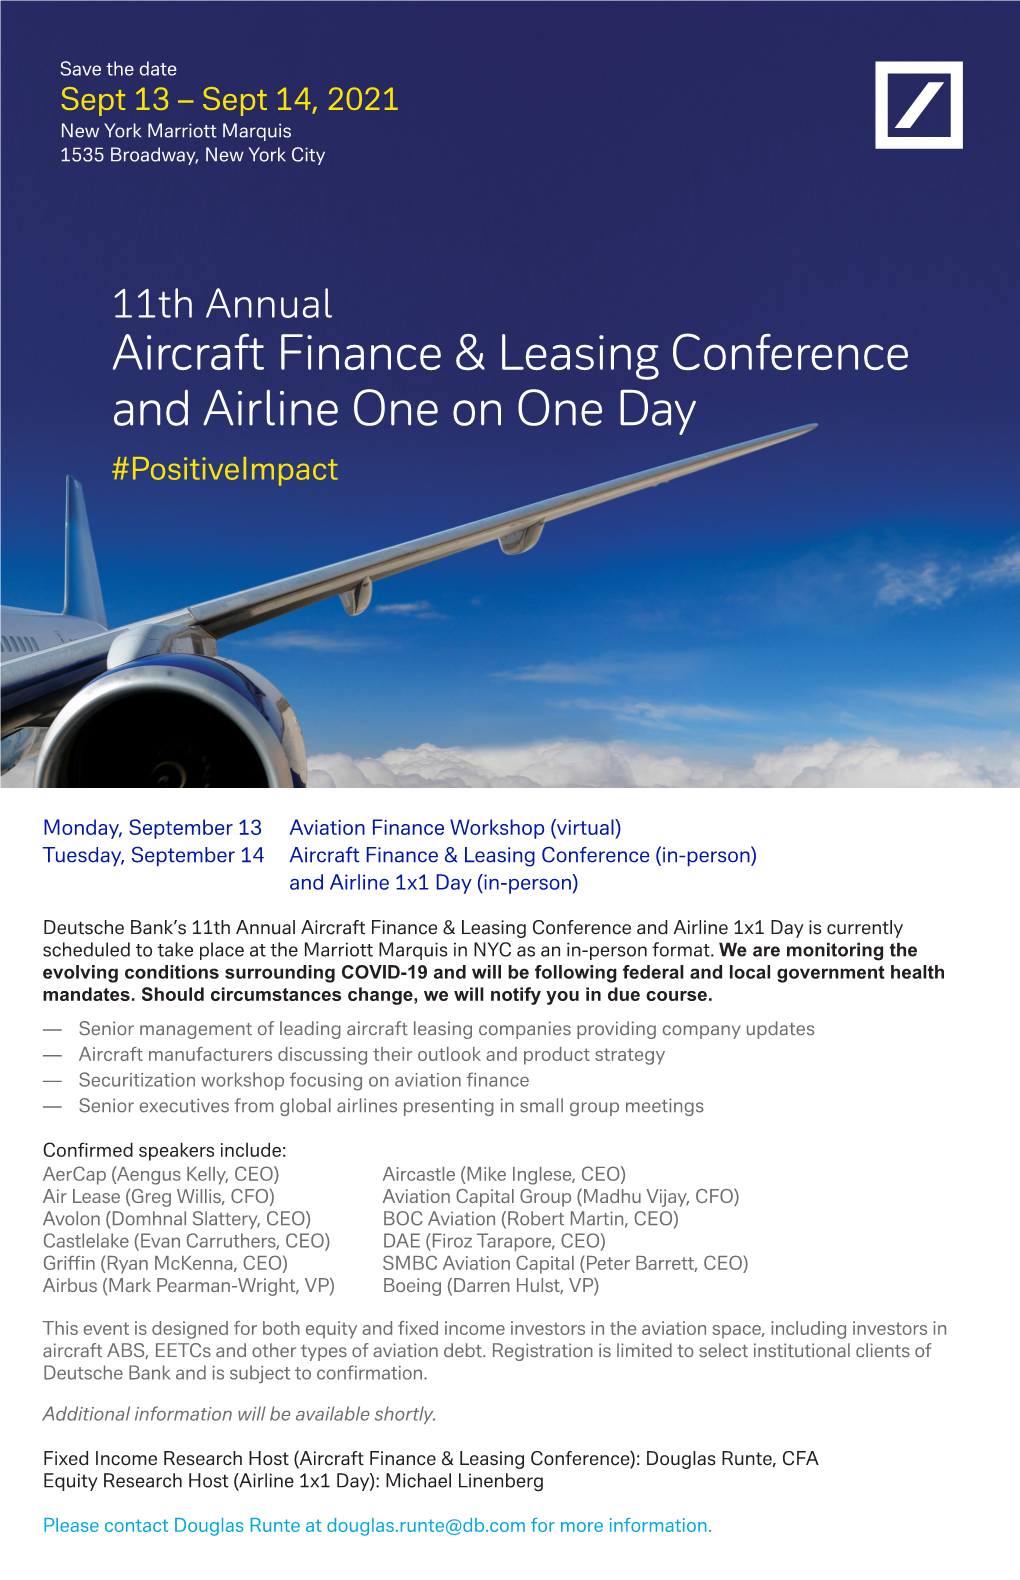 11Th Annual Aircraft Finance & Leasing Conference and Airline